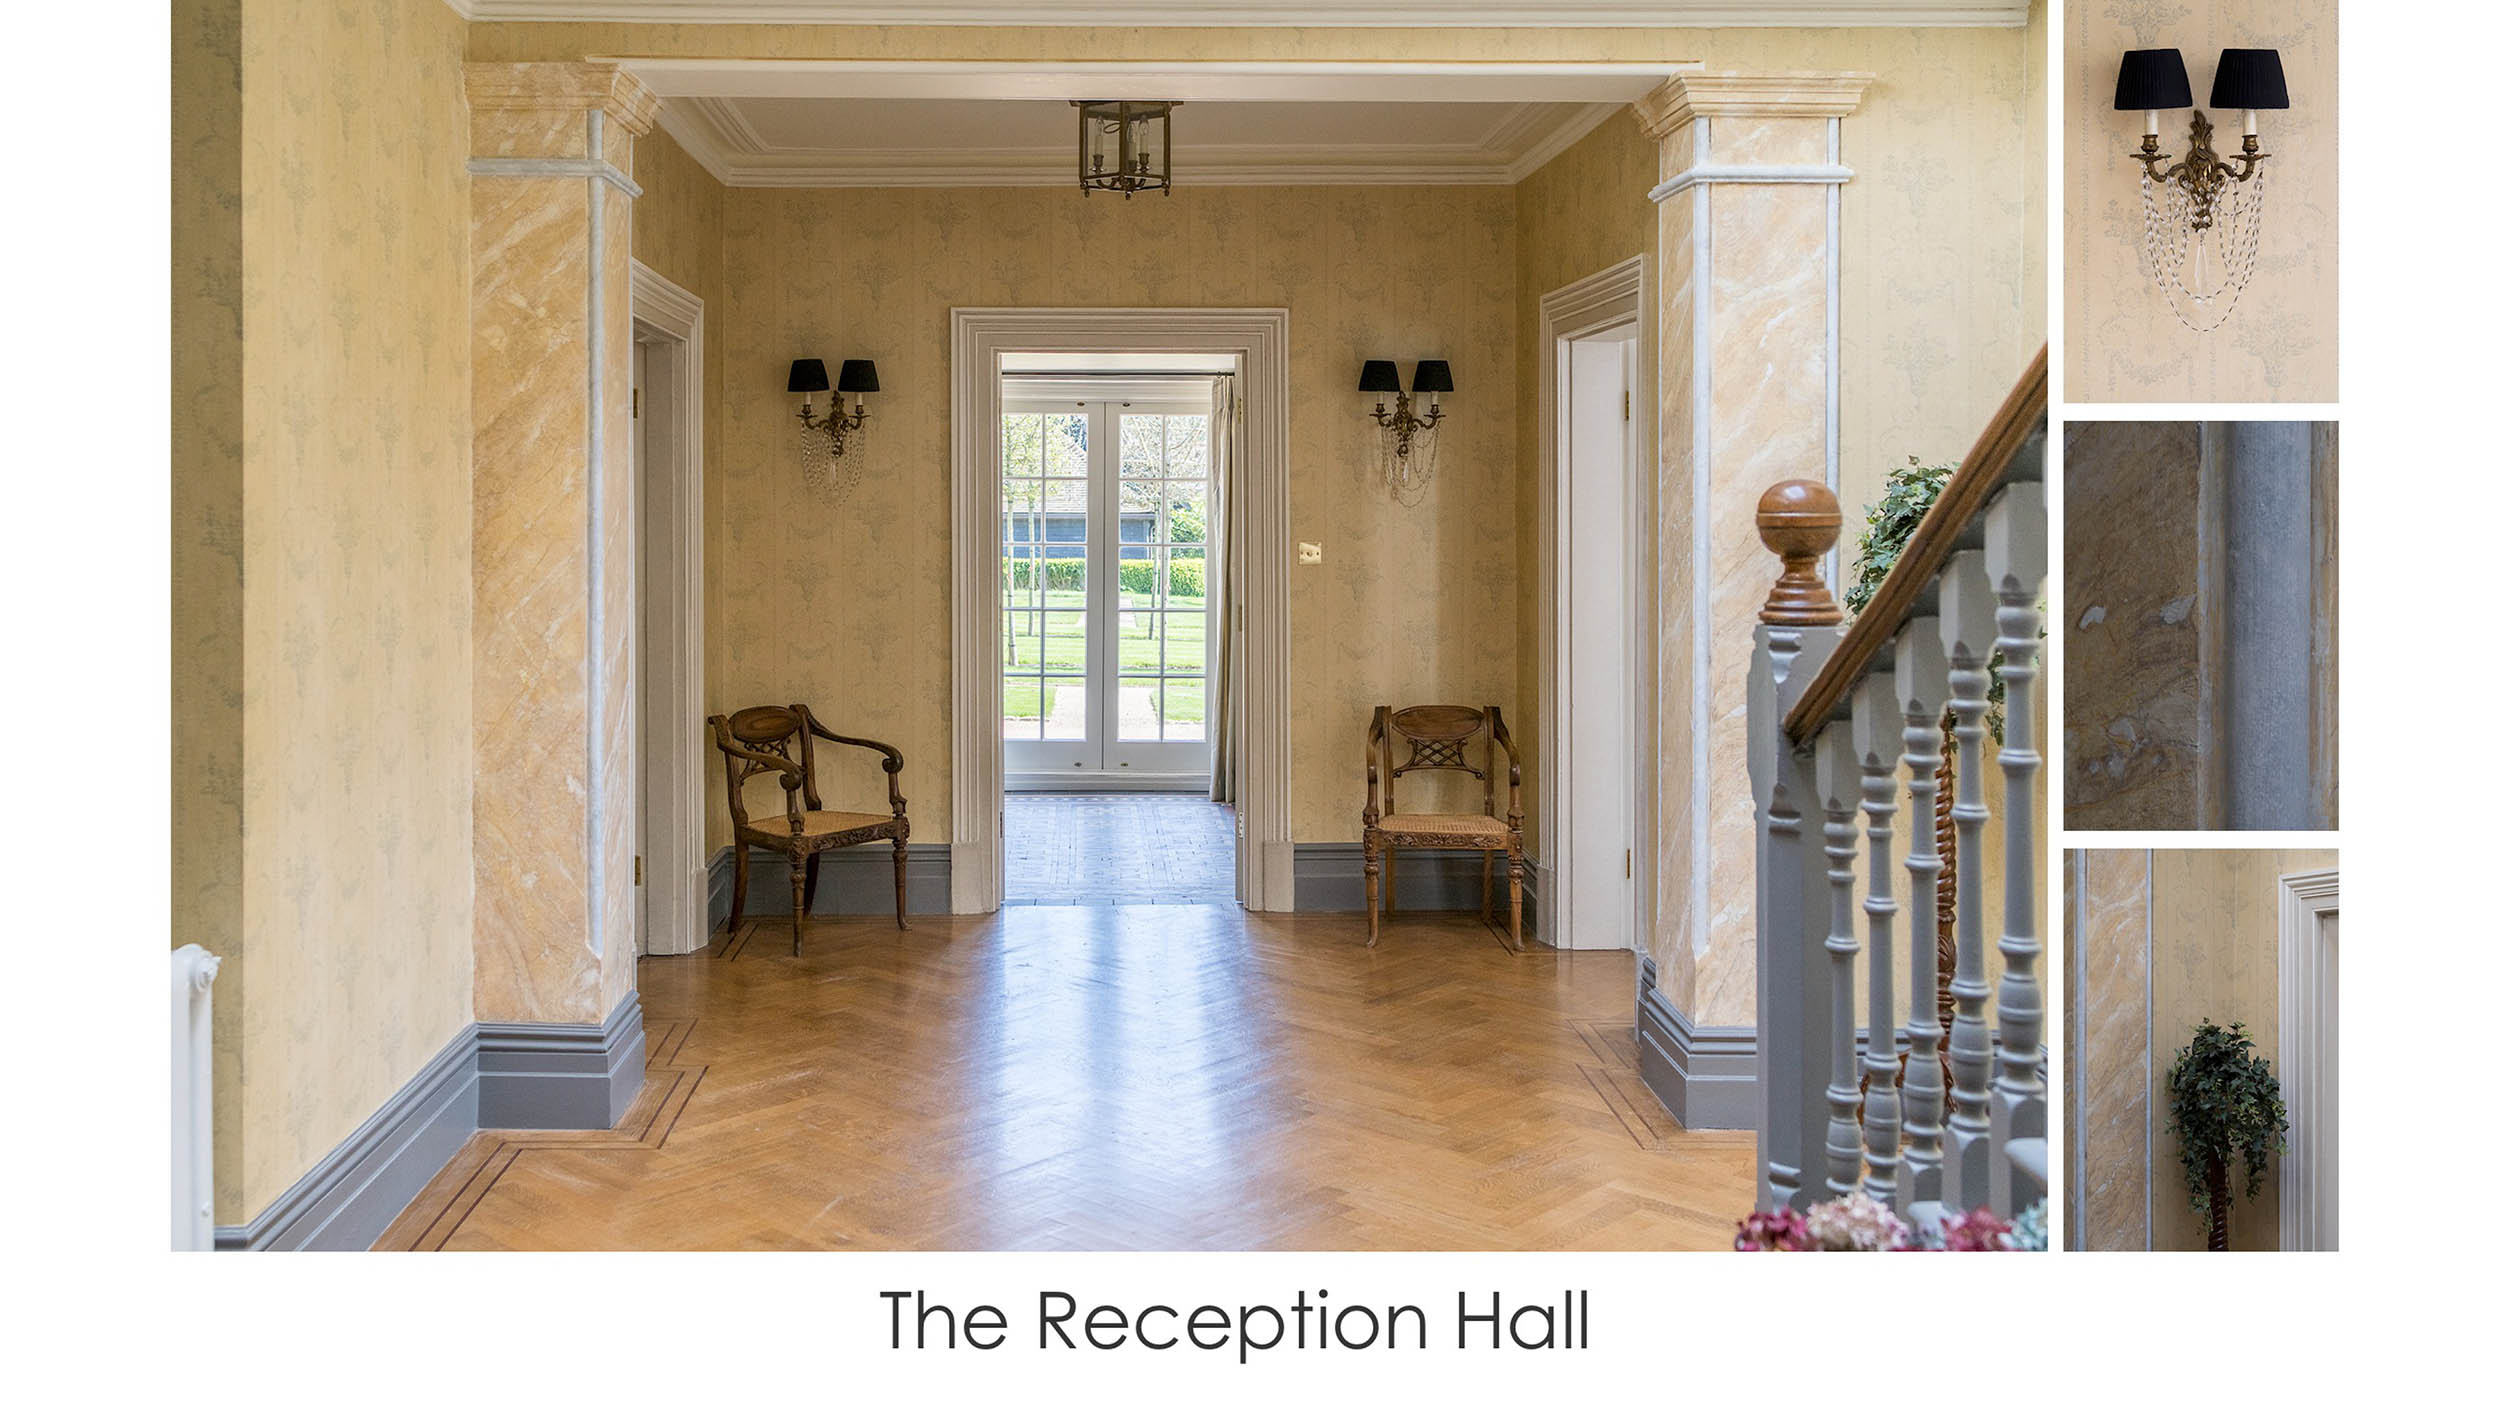 The reception Hall - Pennybridge House - Real Estate Development Projects by Gabriella Atkinson.